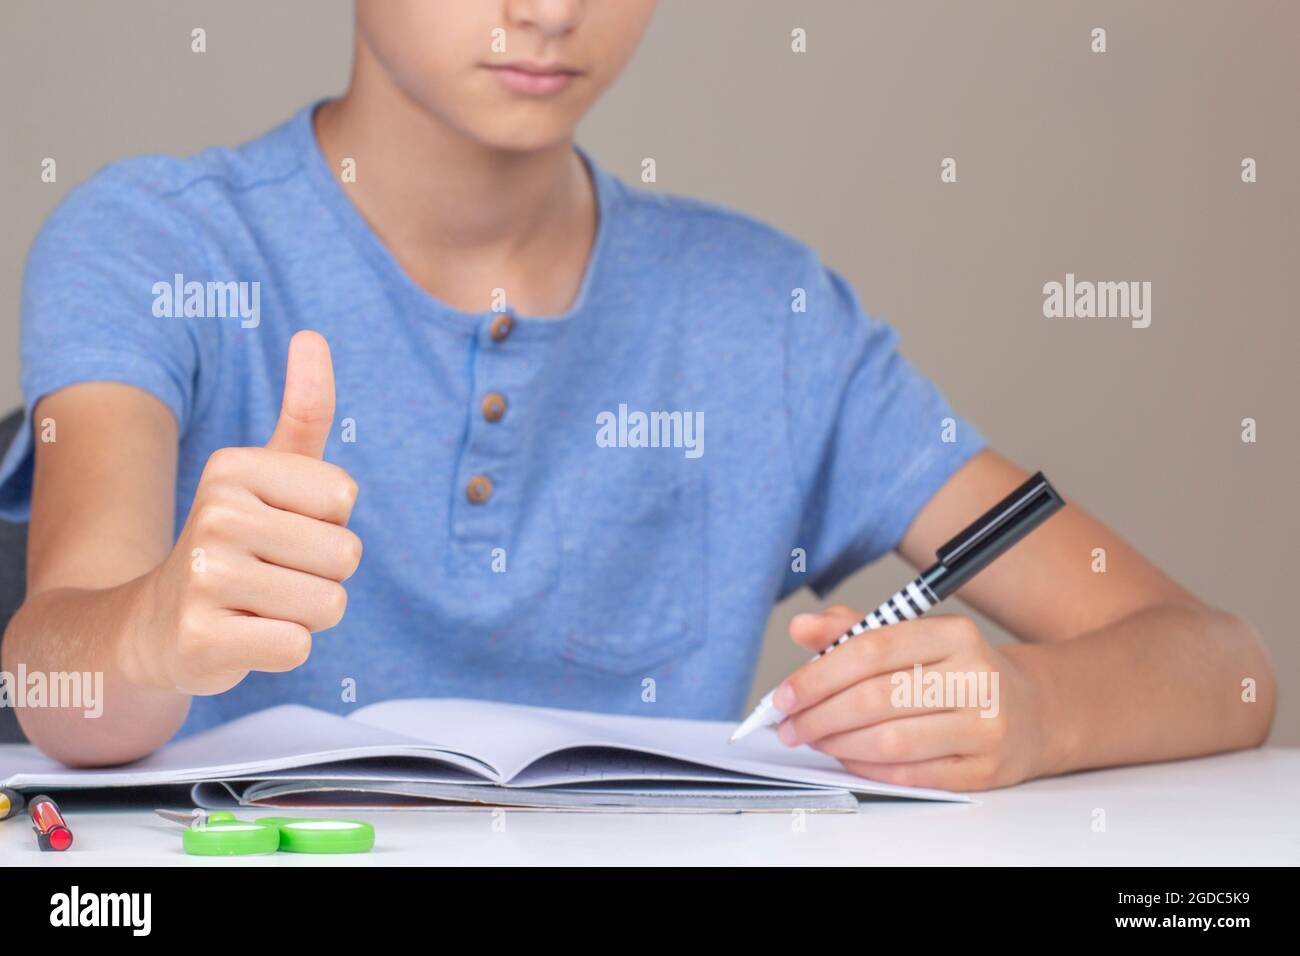 Boy hand holding pen in left hand and writing in a notebook, doing homework. Thumb up hand gesture. Left Handers Day Stock Photo